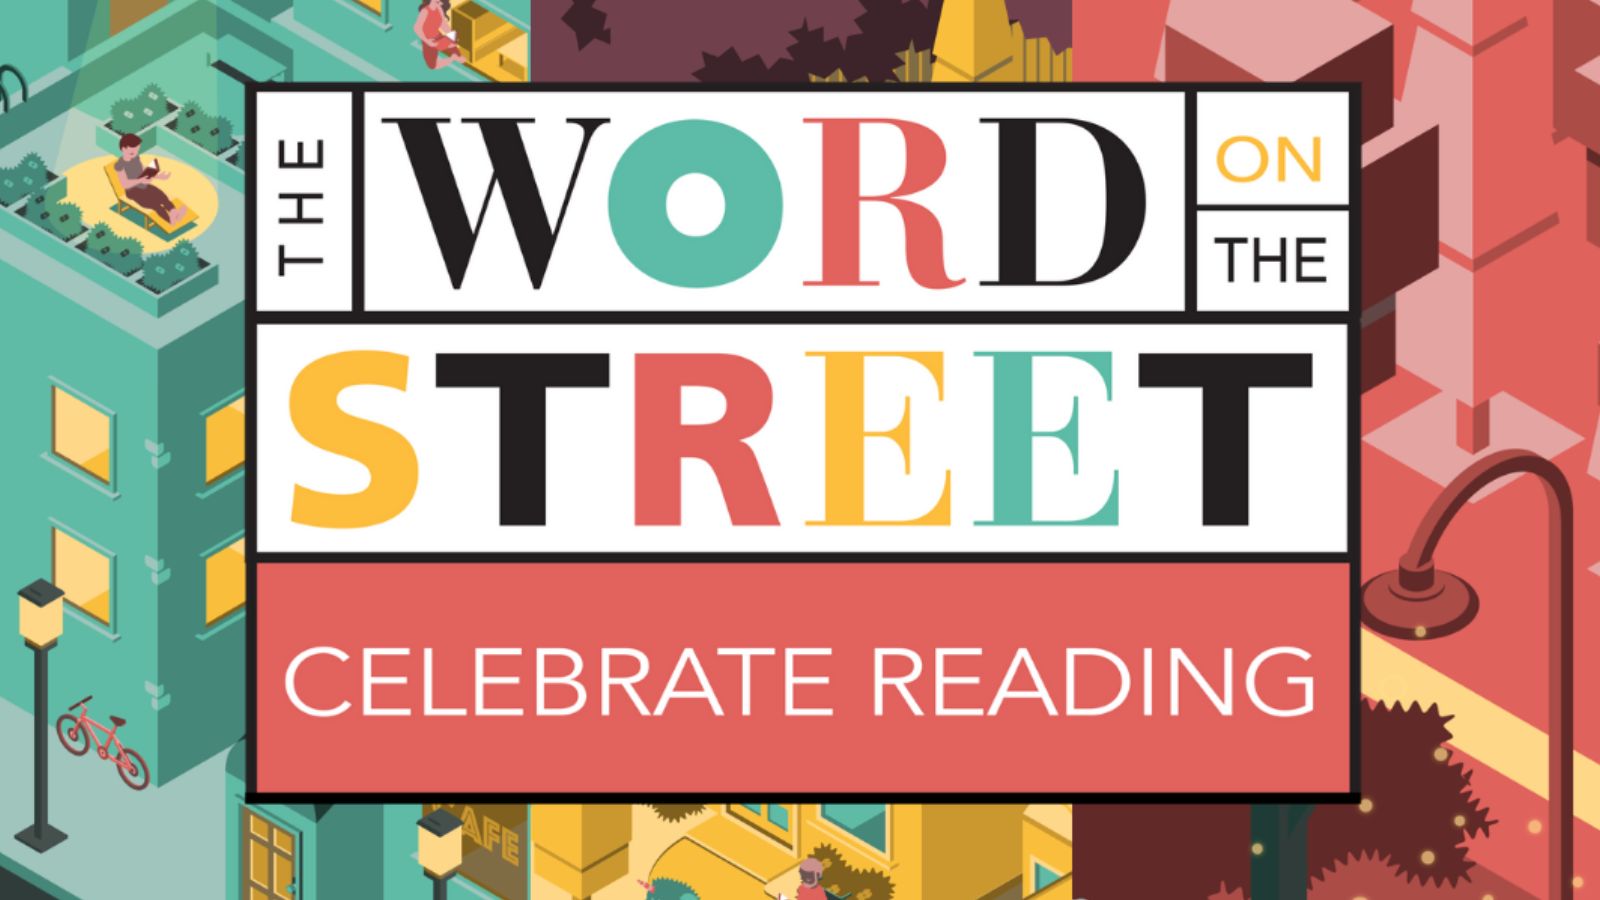 A Poster for Toronto's The Word on the Street Book and Magazine Festival.